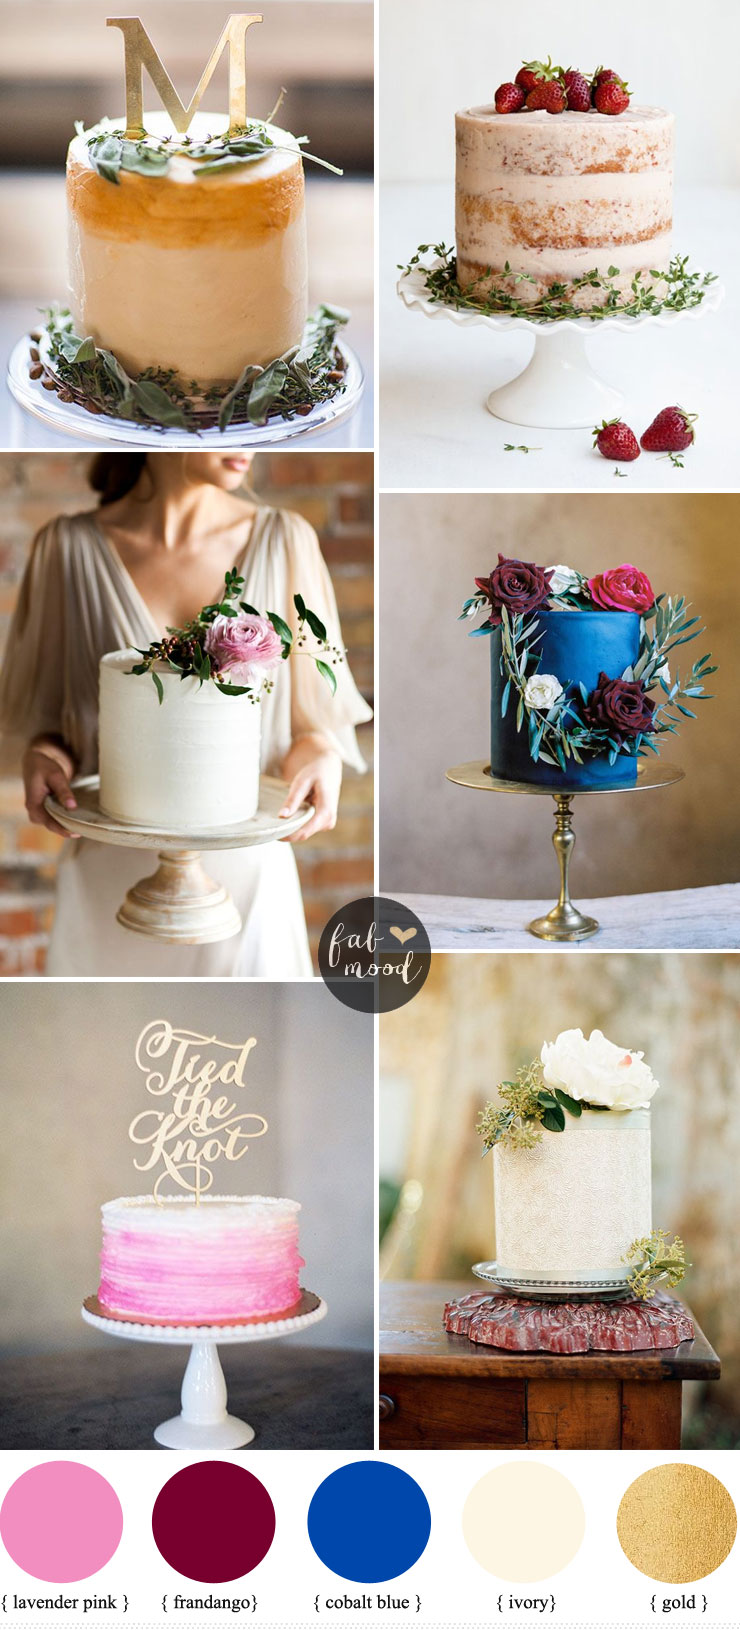 37 One Tier Wedding Cakes will have your guests' mouths watering | fabmood.com